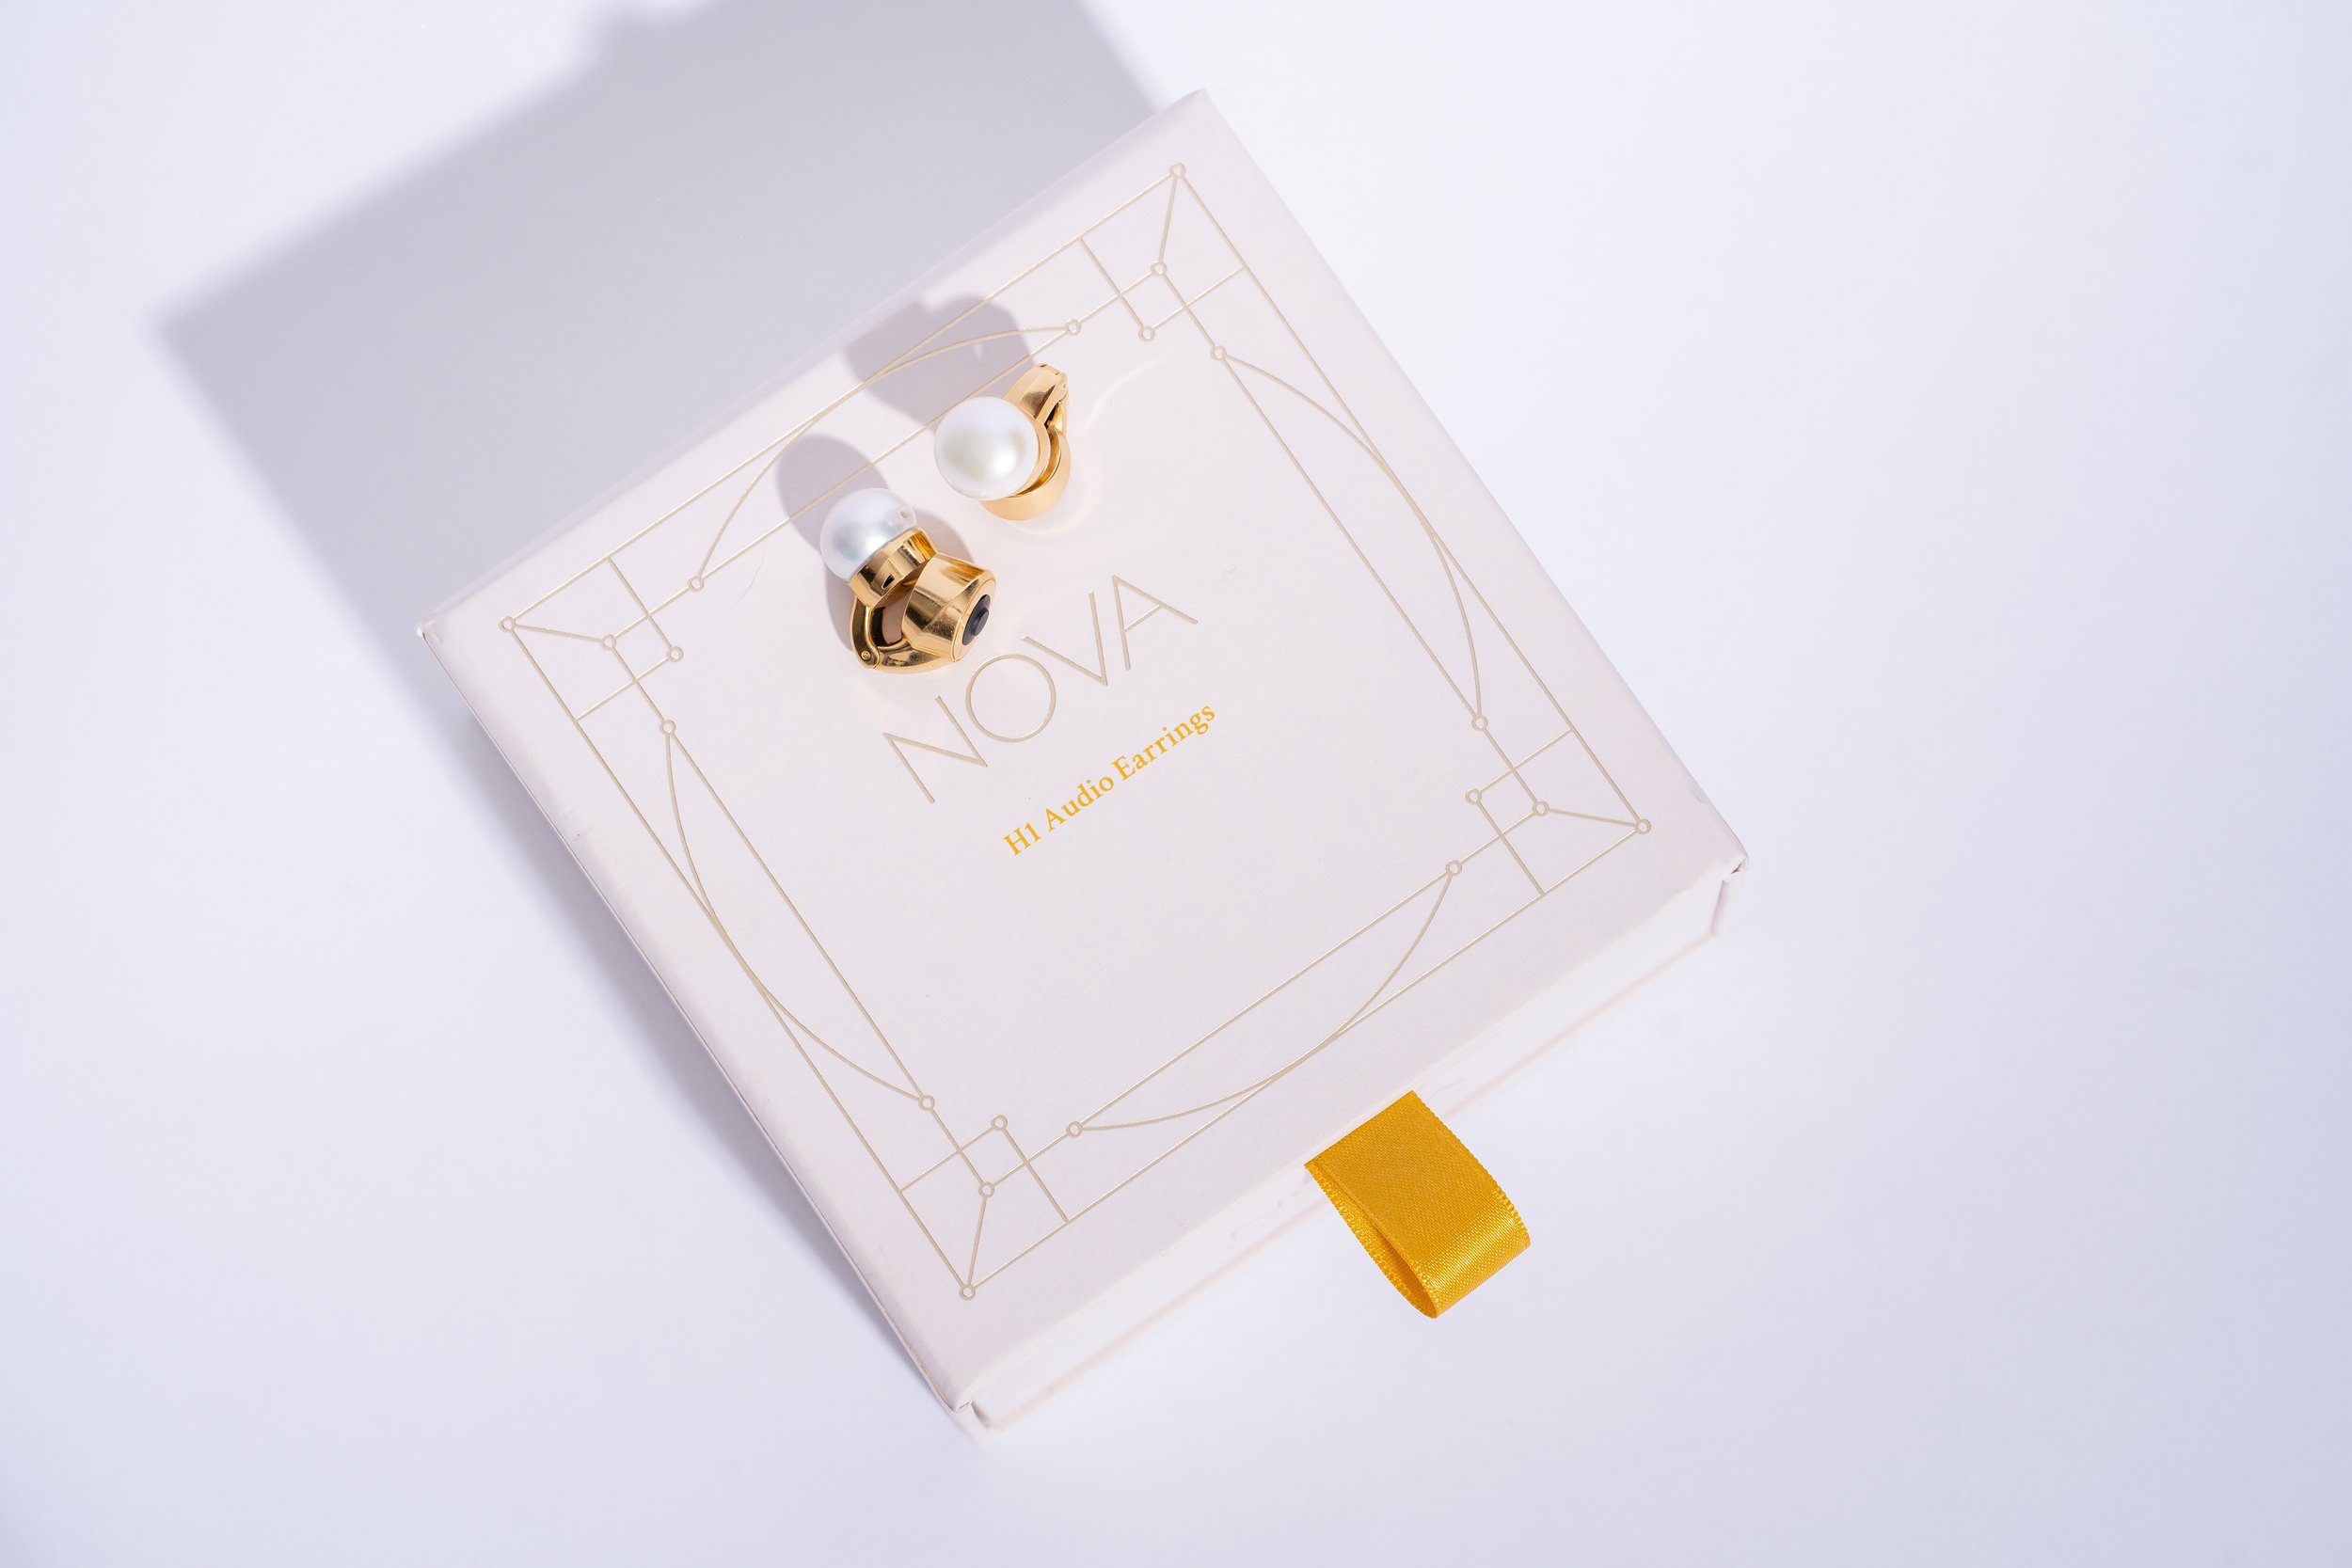 NOVA Audio Earrings - 🎧 Do you want to know more about NOVA H1 Audio  Earrings, the idea behind it and our company story? Check out the brand-new  blog section on our